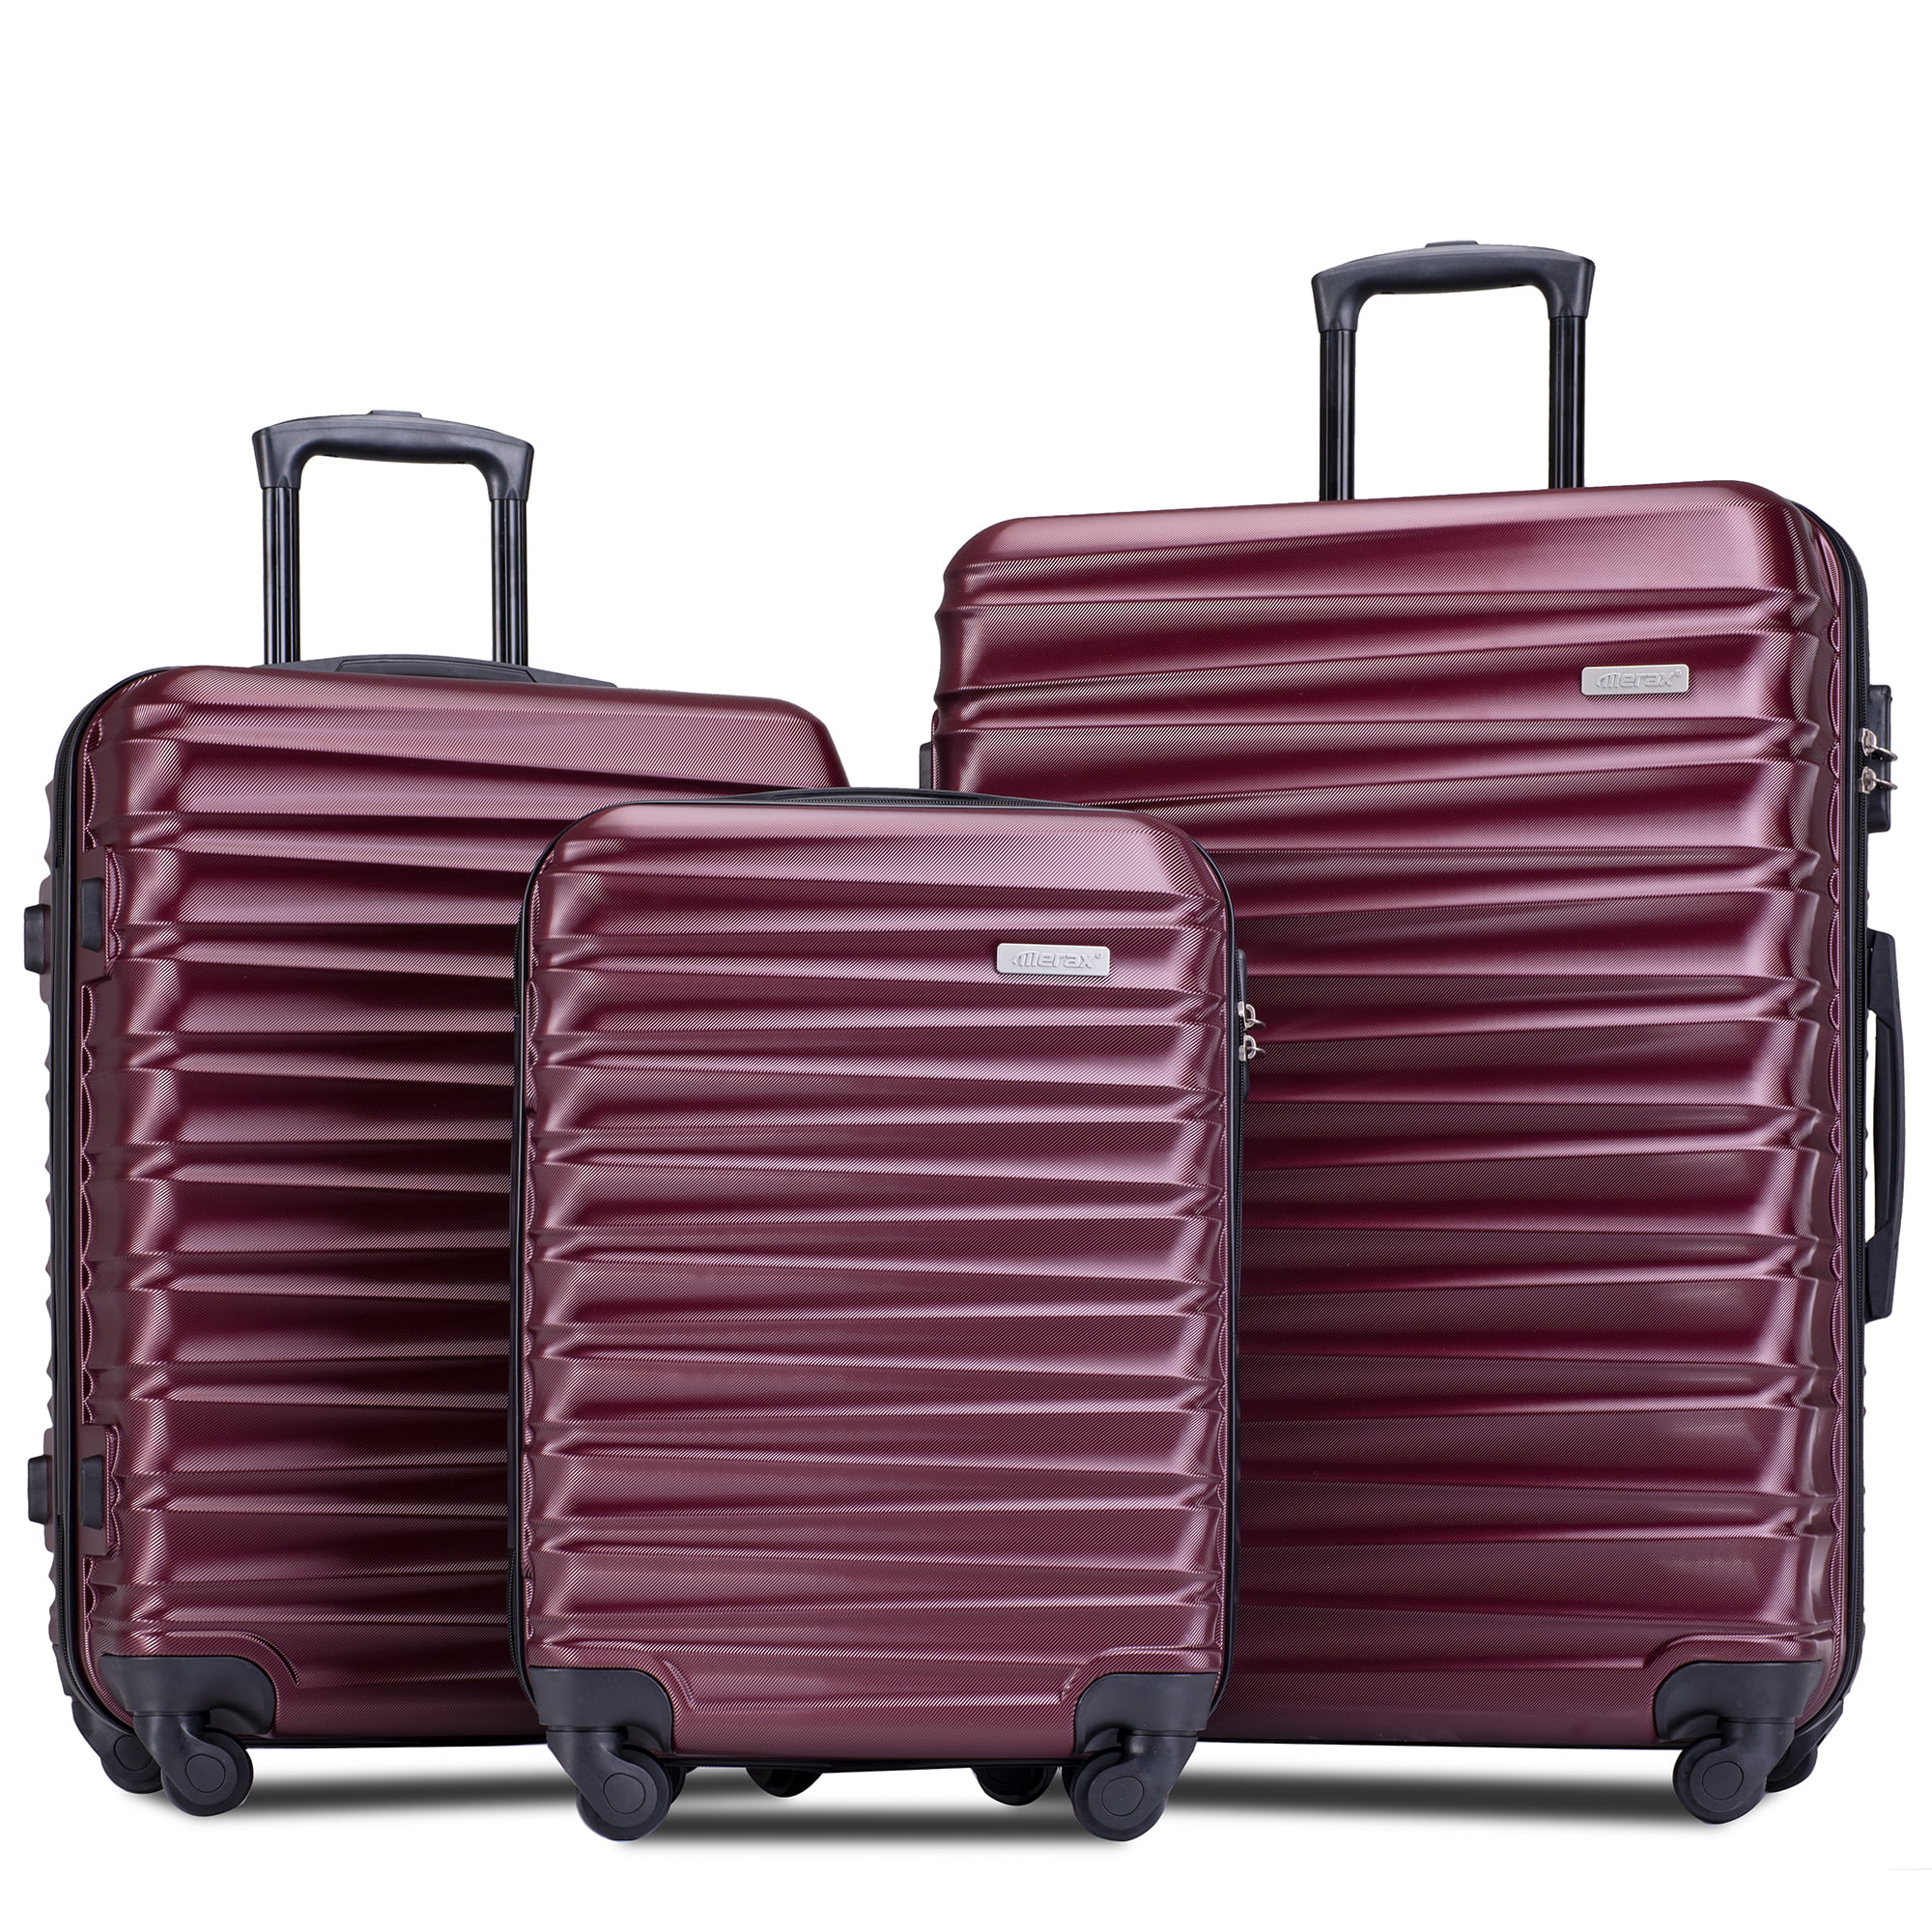 lightweight durable carry on luggage